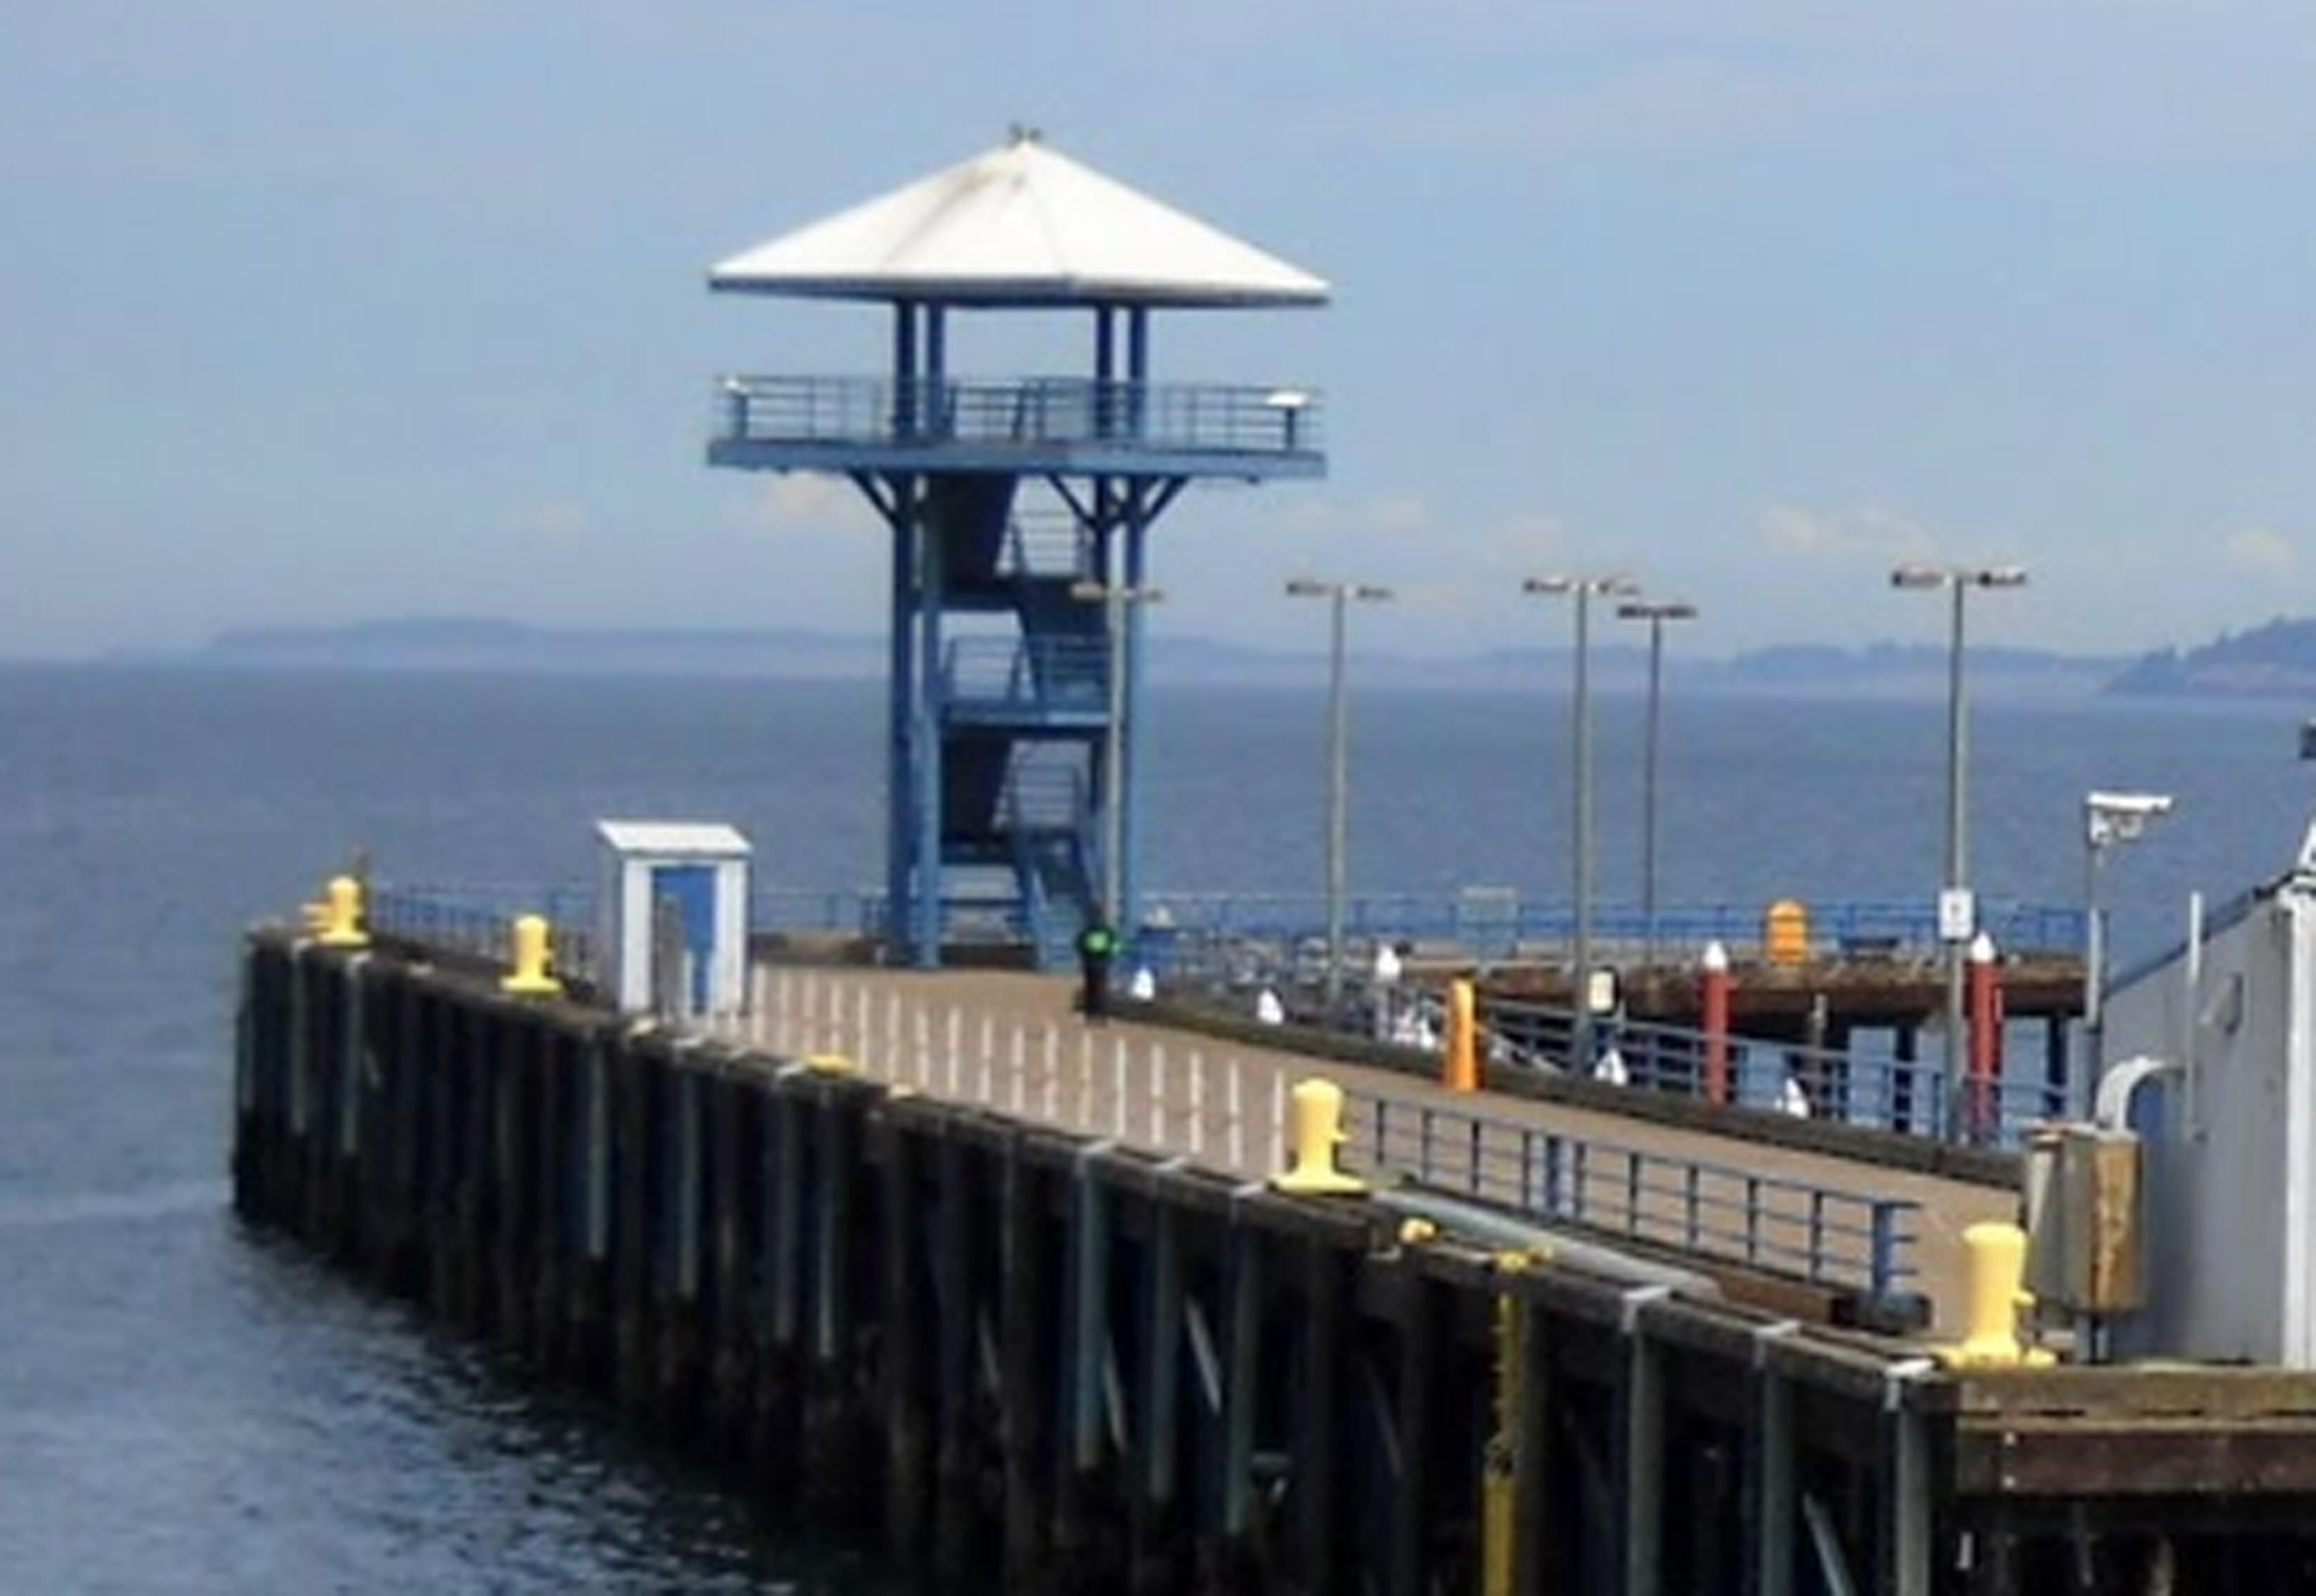 The viewing tower at the end of Port Angeles City Pier. (Pninsula Daily News file photo)